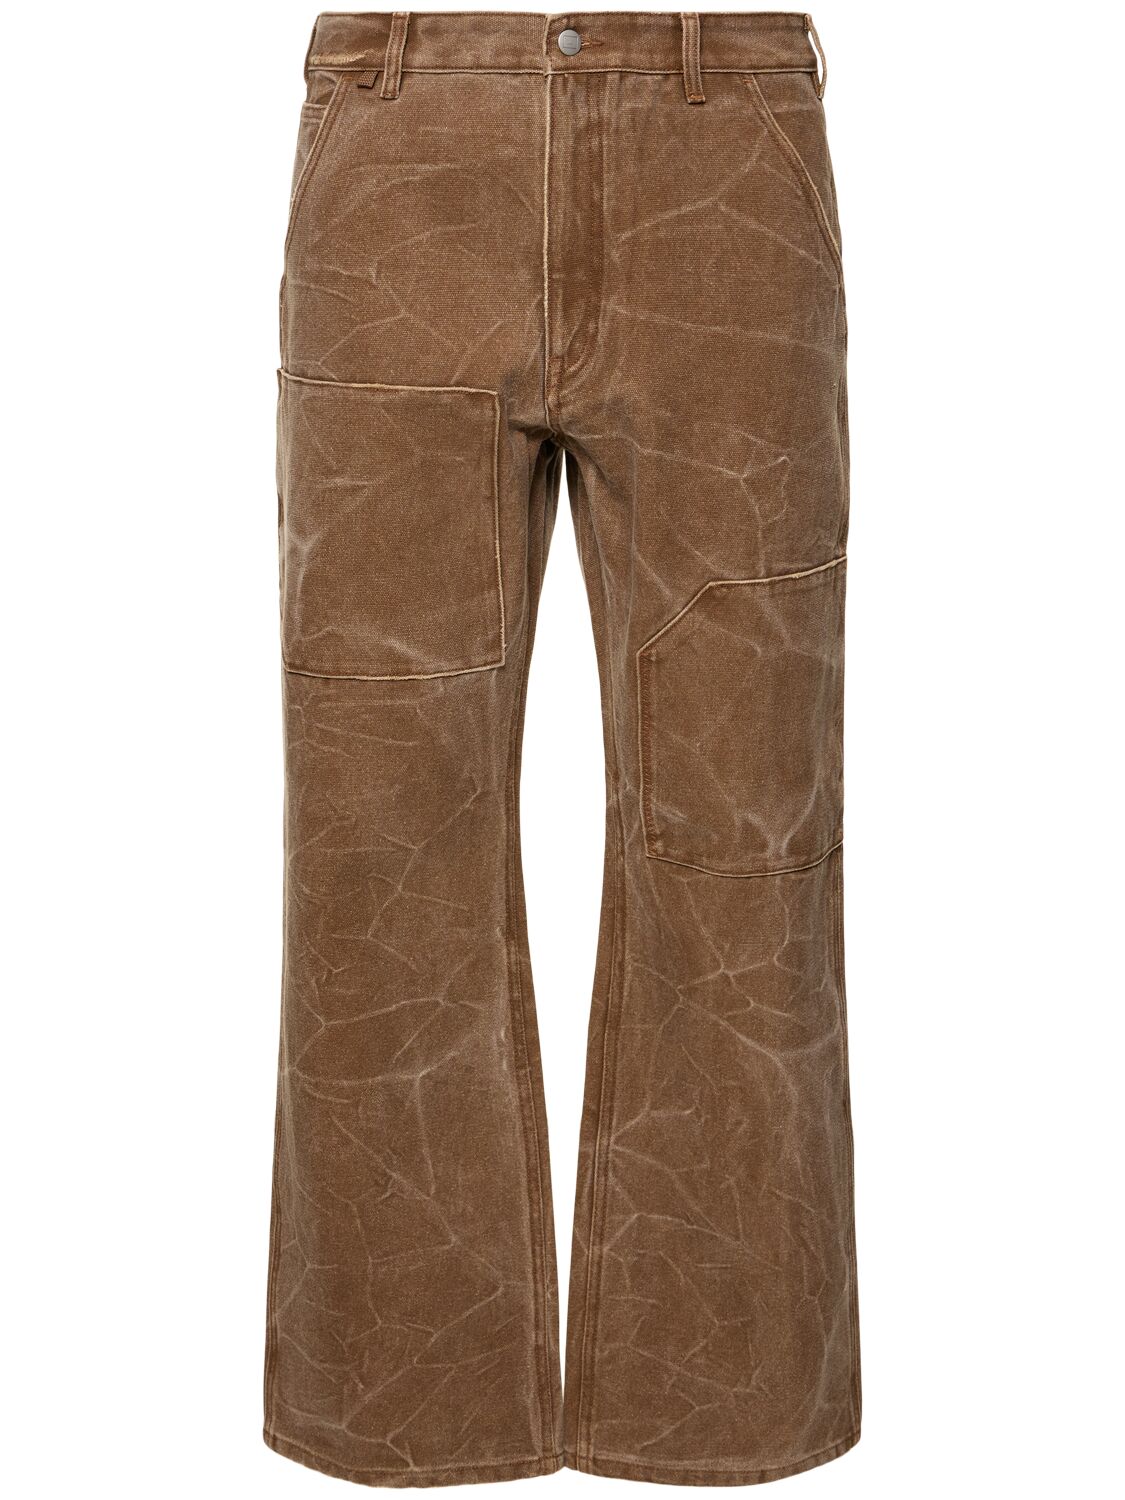 Acne Studios Palma Patch Logo Cotton Canvas Pants In Toffee Brown